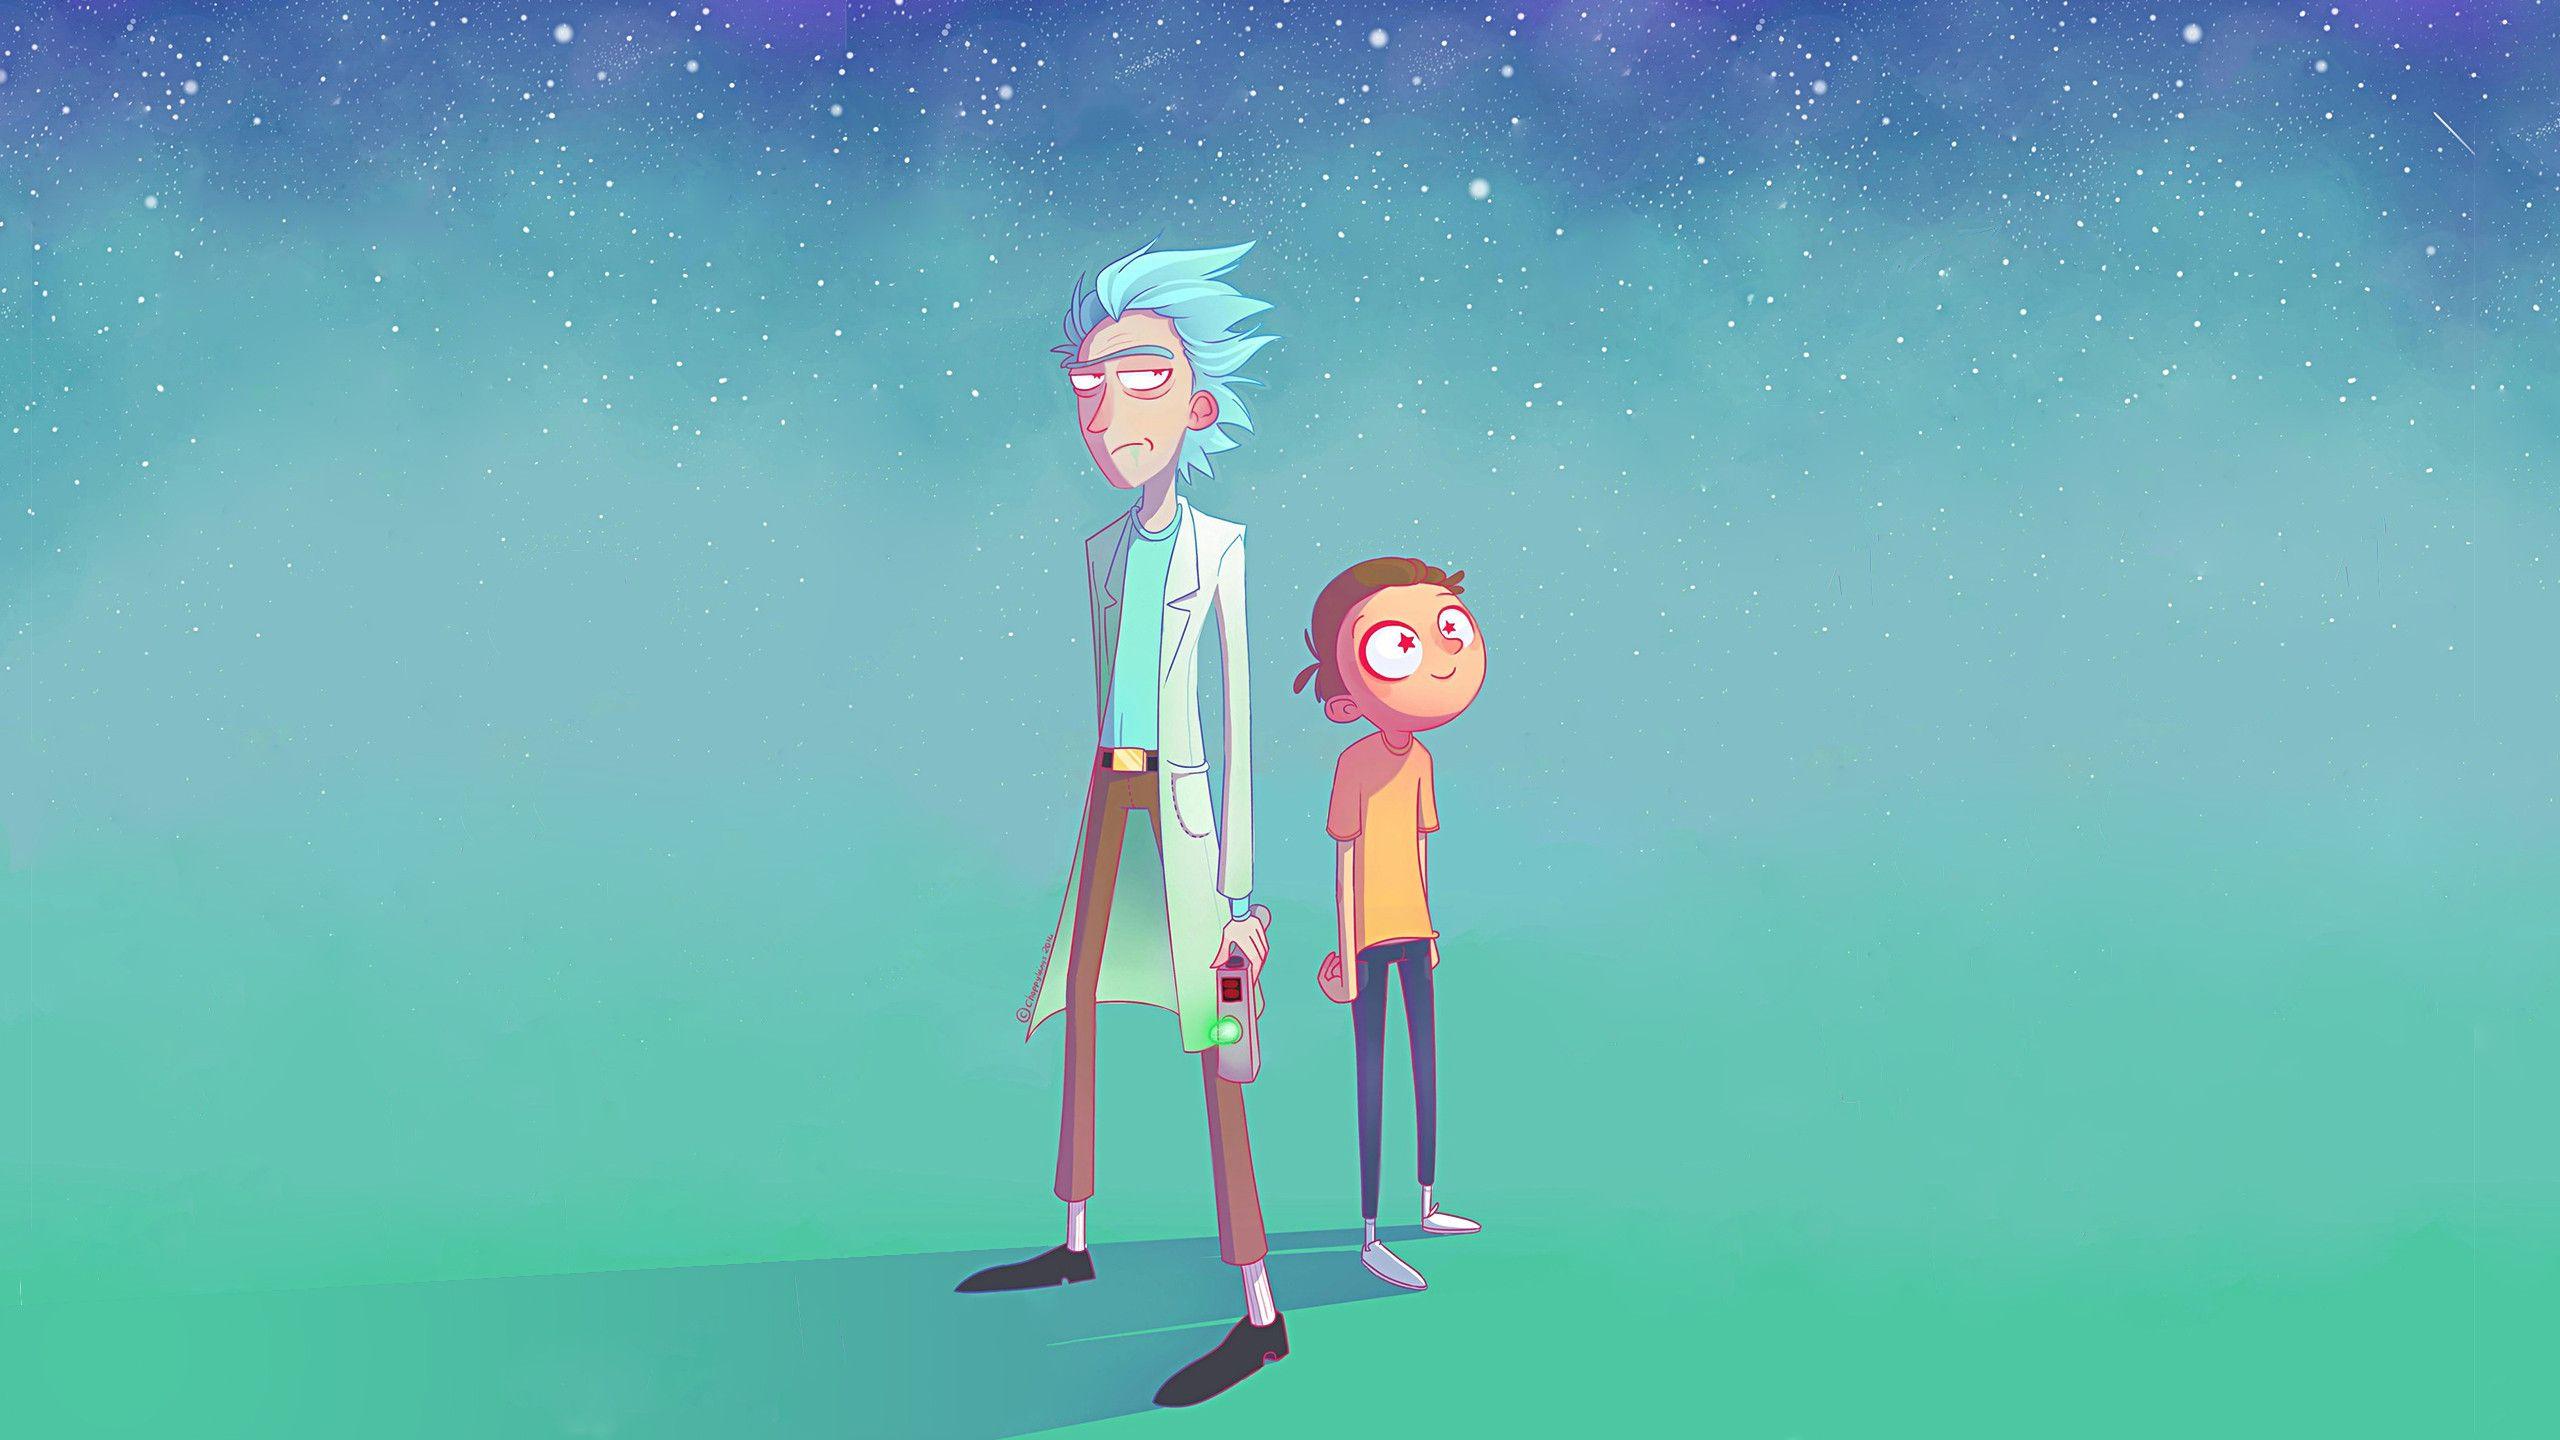 Rick and Morty by Choppywings [2560x1440] #wallpaper. Cartoon